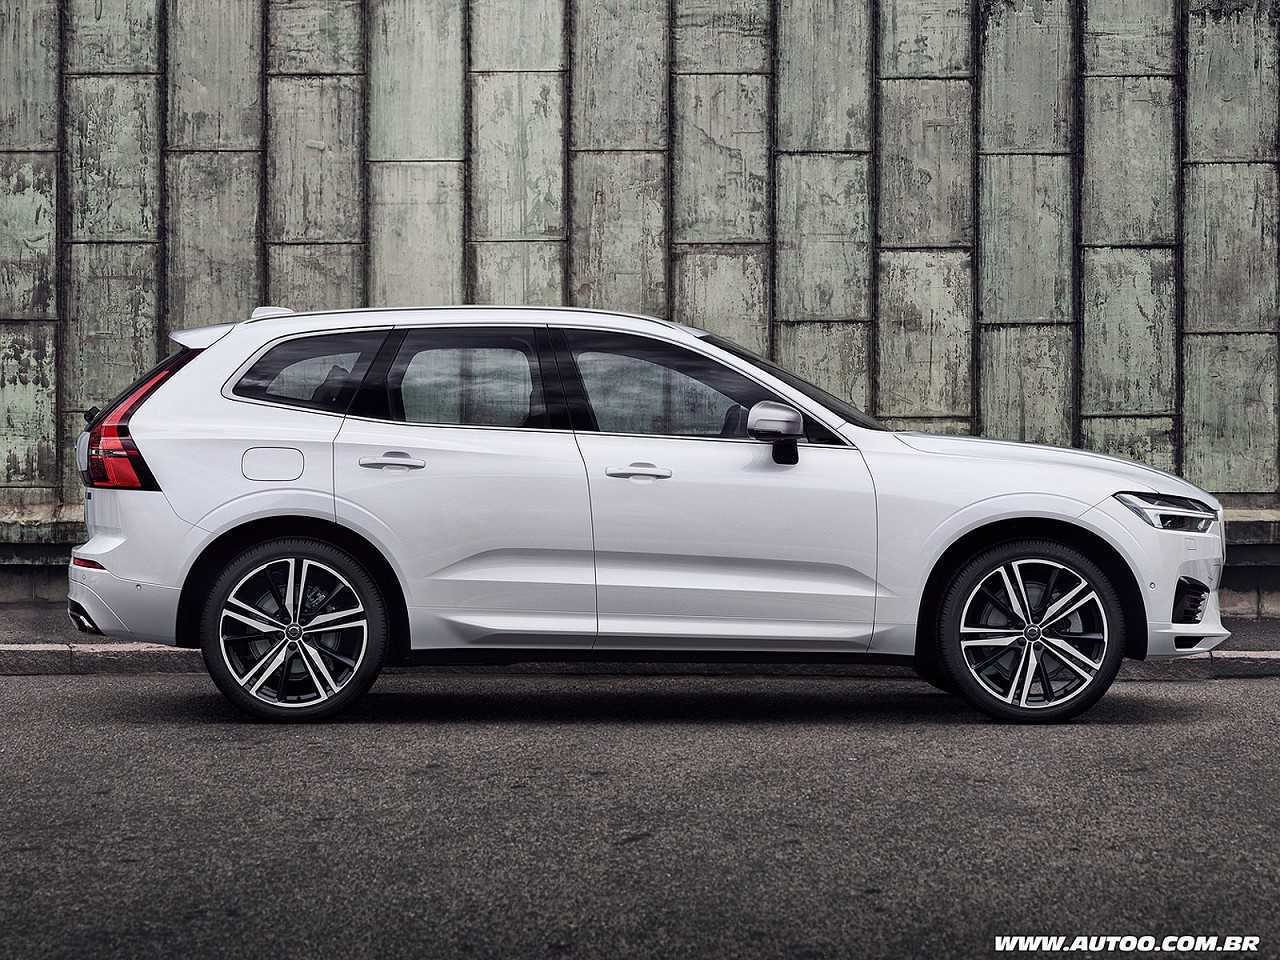 Volvo XC60 2019 - lateral